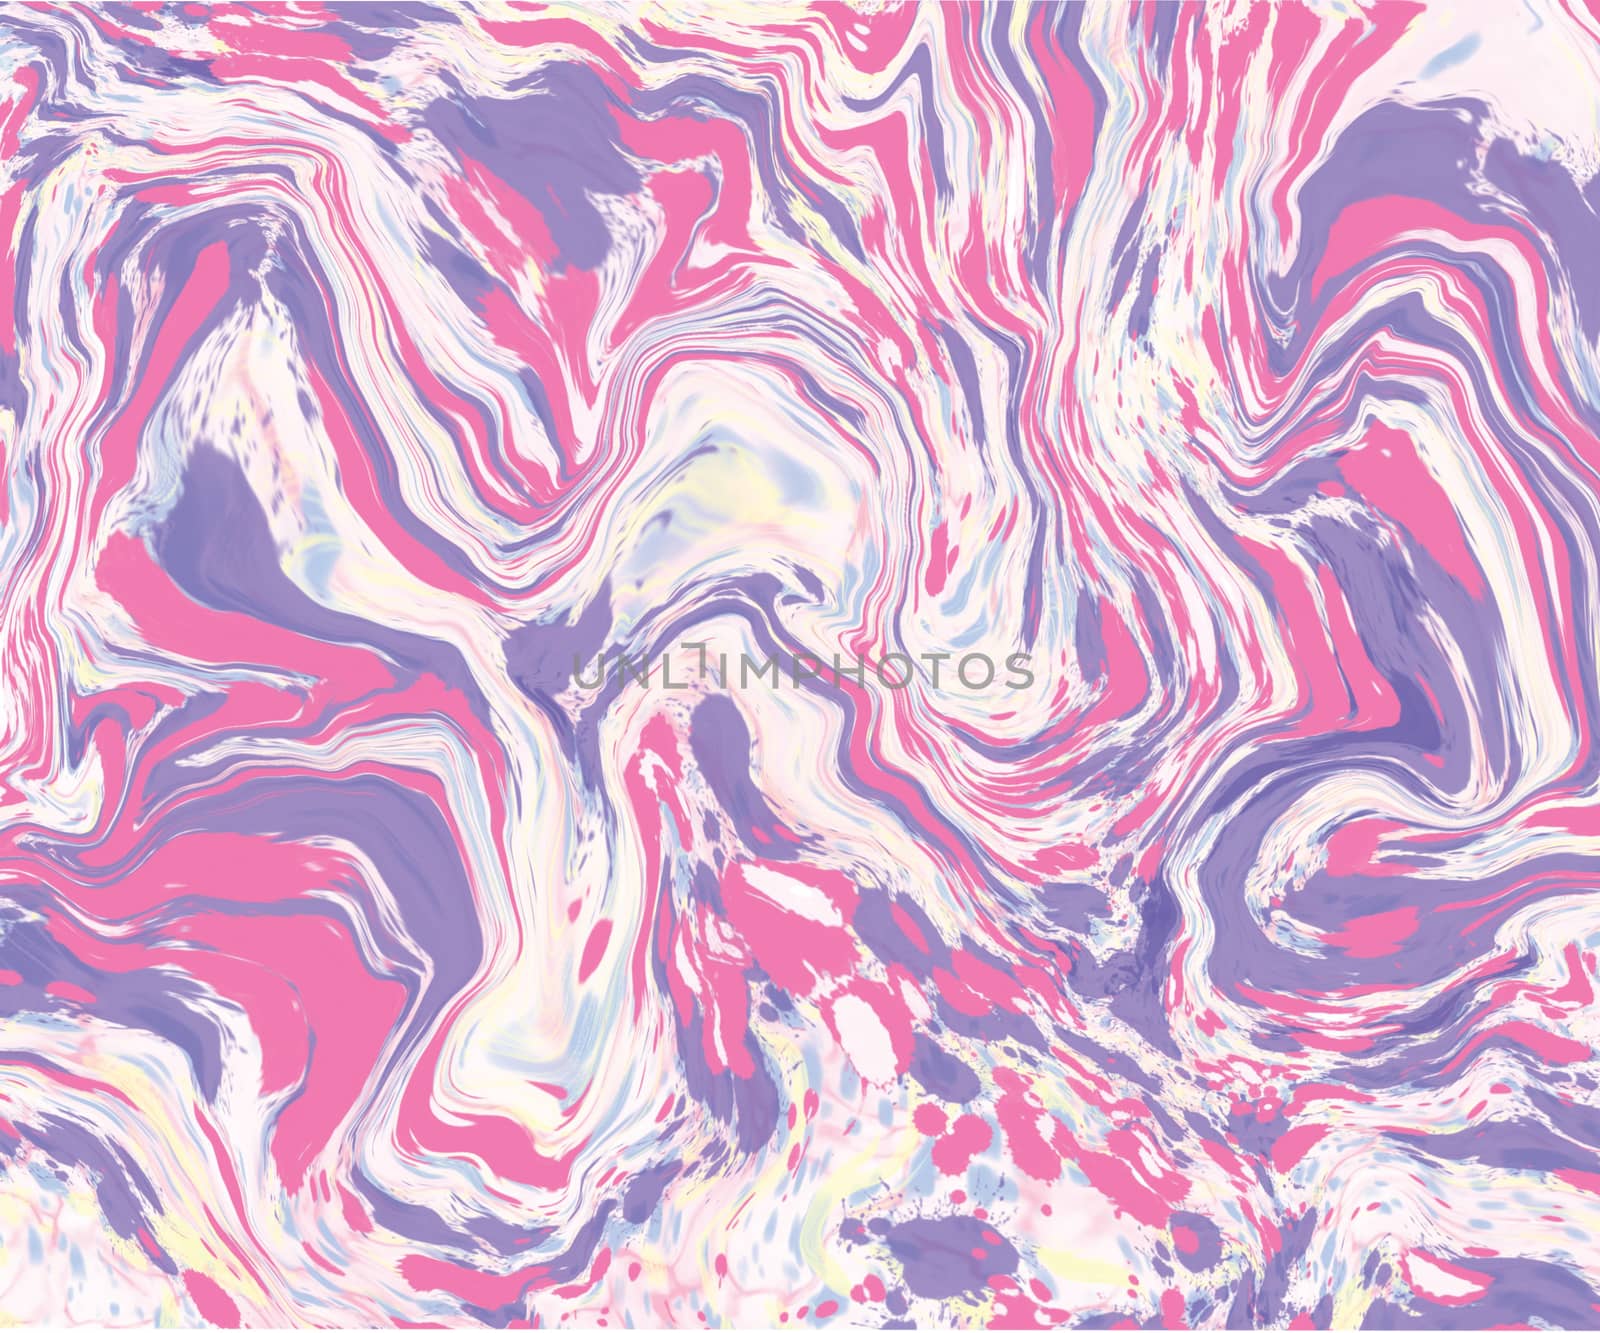 Marble texture background, trendy colorful texture in pastel. Modern Colorful Liquid design. Can use for creative project design cover, book, printing,card, fashion.